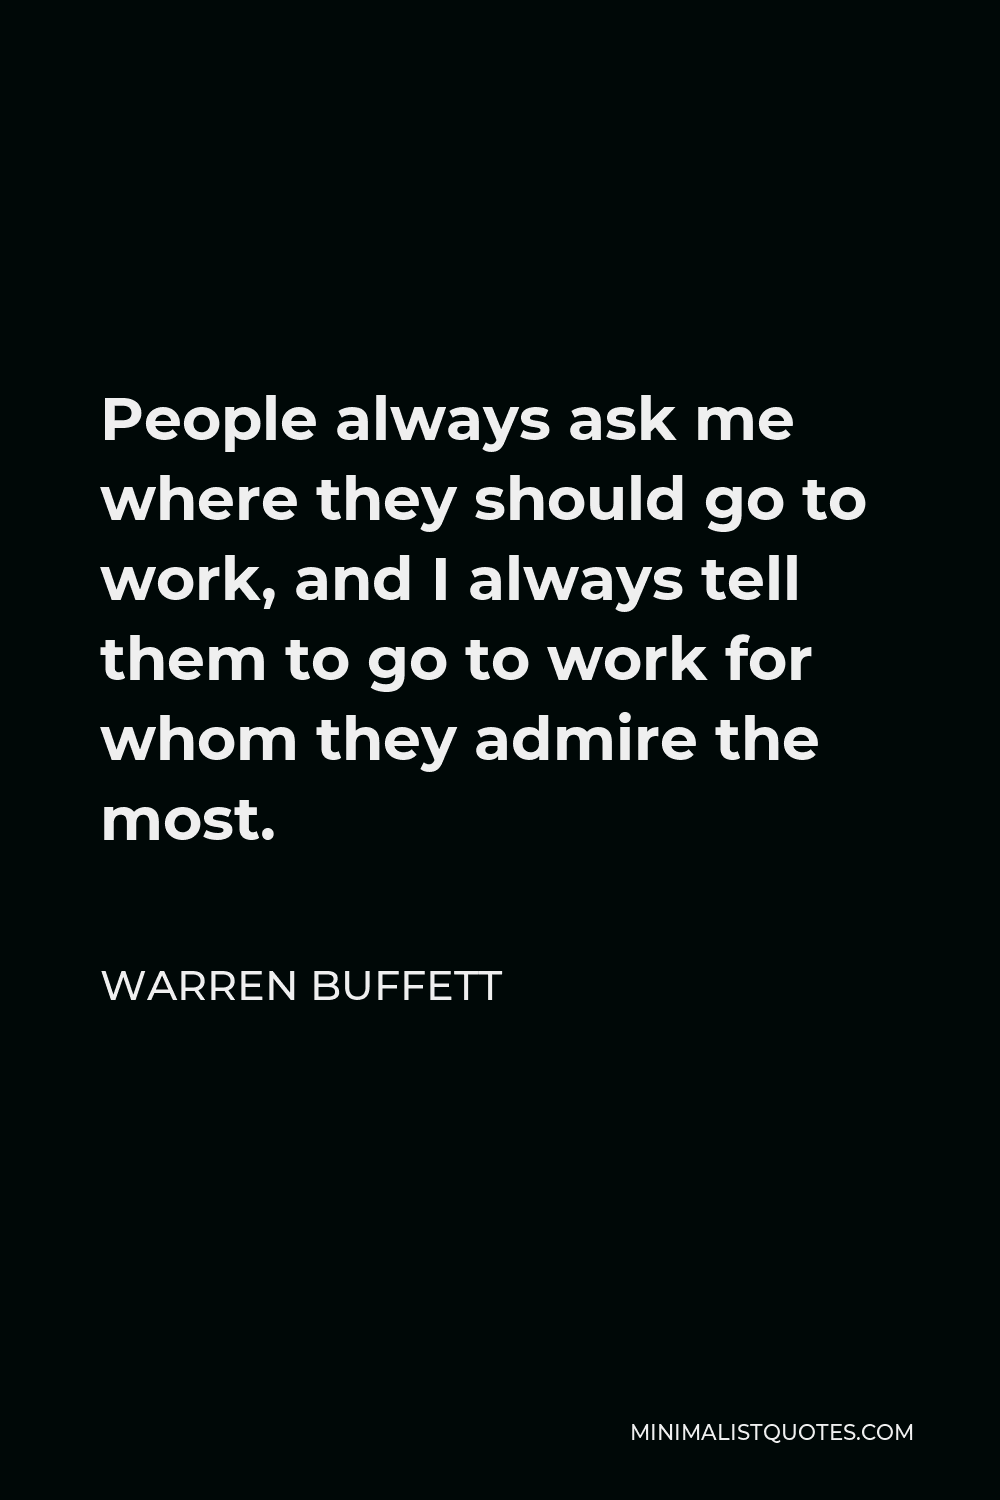 Warren Buffett Quote - People always ask me where they should go to work, and I always tell them to go to work for whom they admire the most.